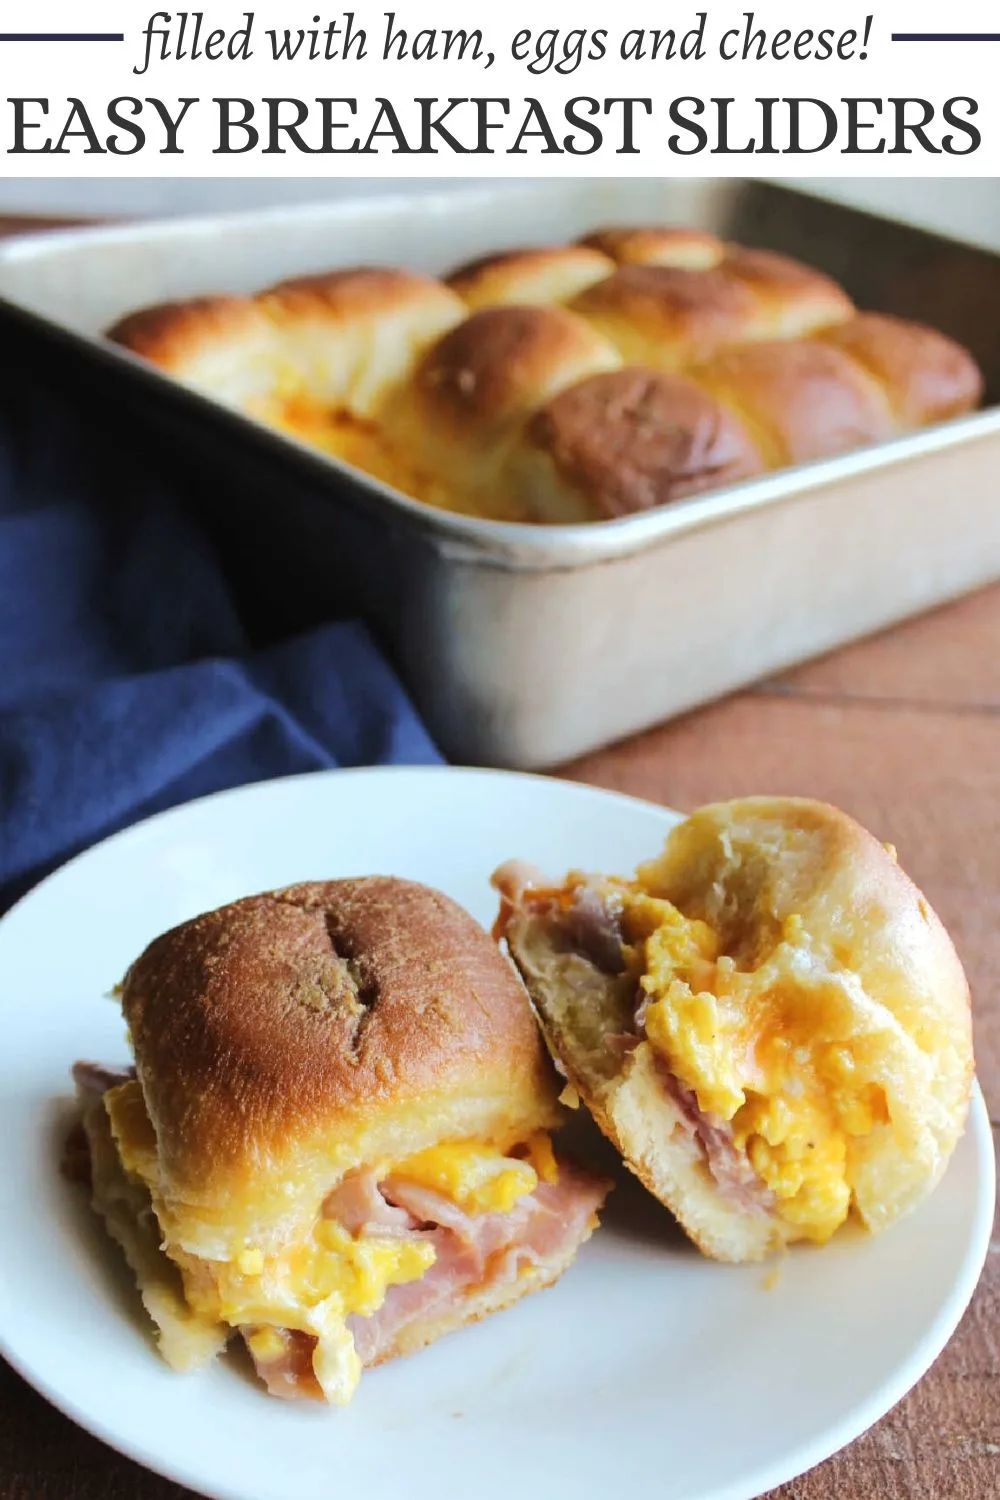 These simple ham, egg and cheese sliders are perfect for any meal, but they make a great make ahead breakfast. Scrambled eggs, ham, cheese and rolls come together to make a great hand held meal that the whole family will love.